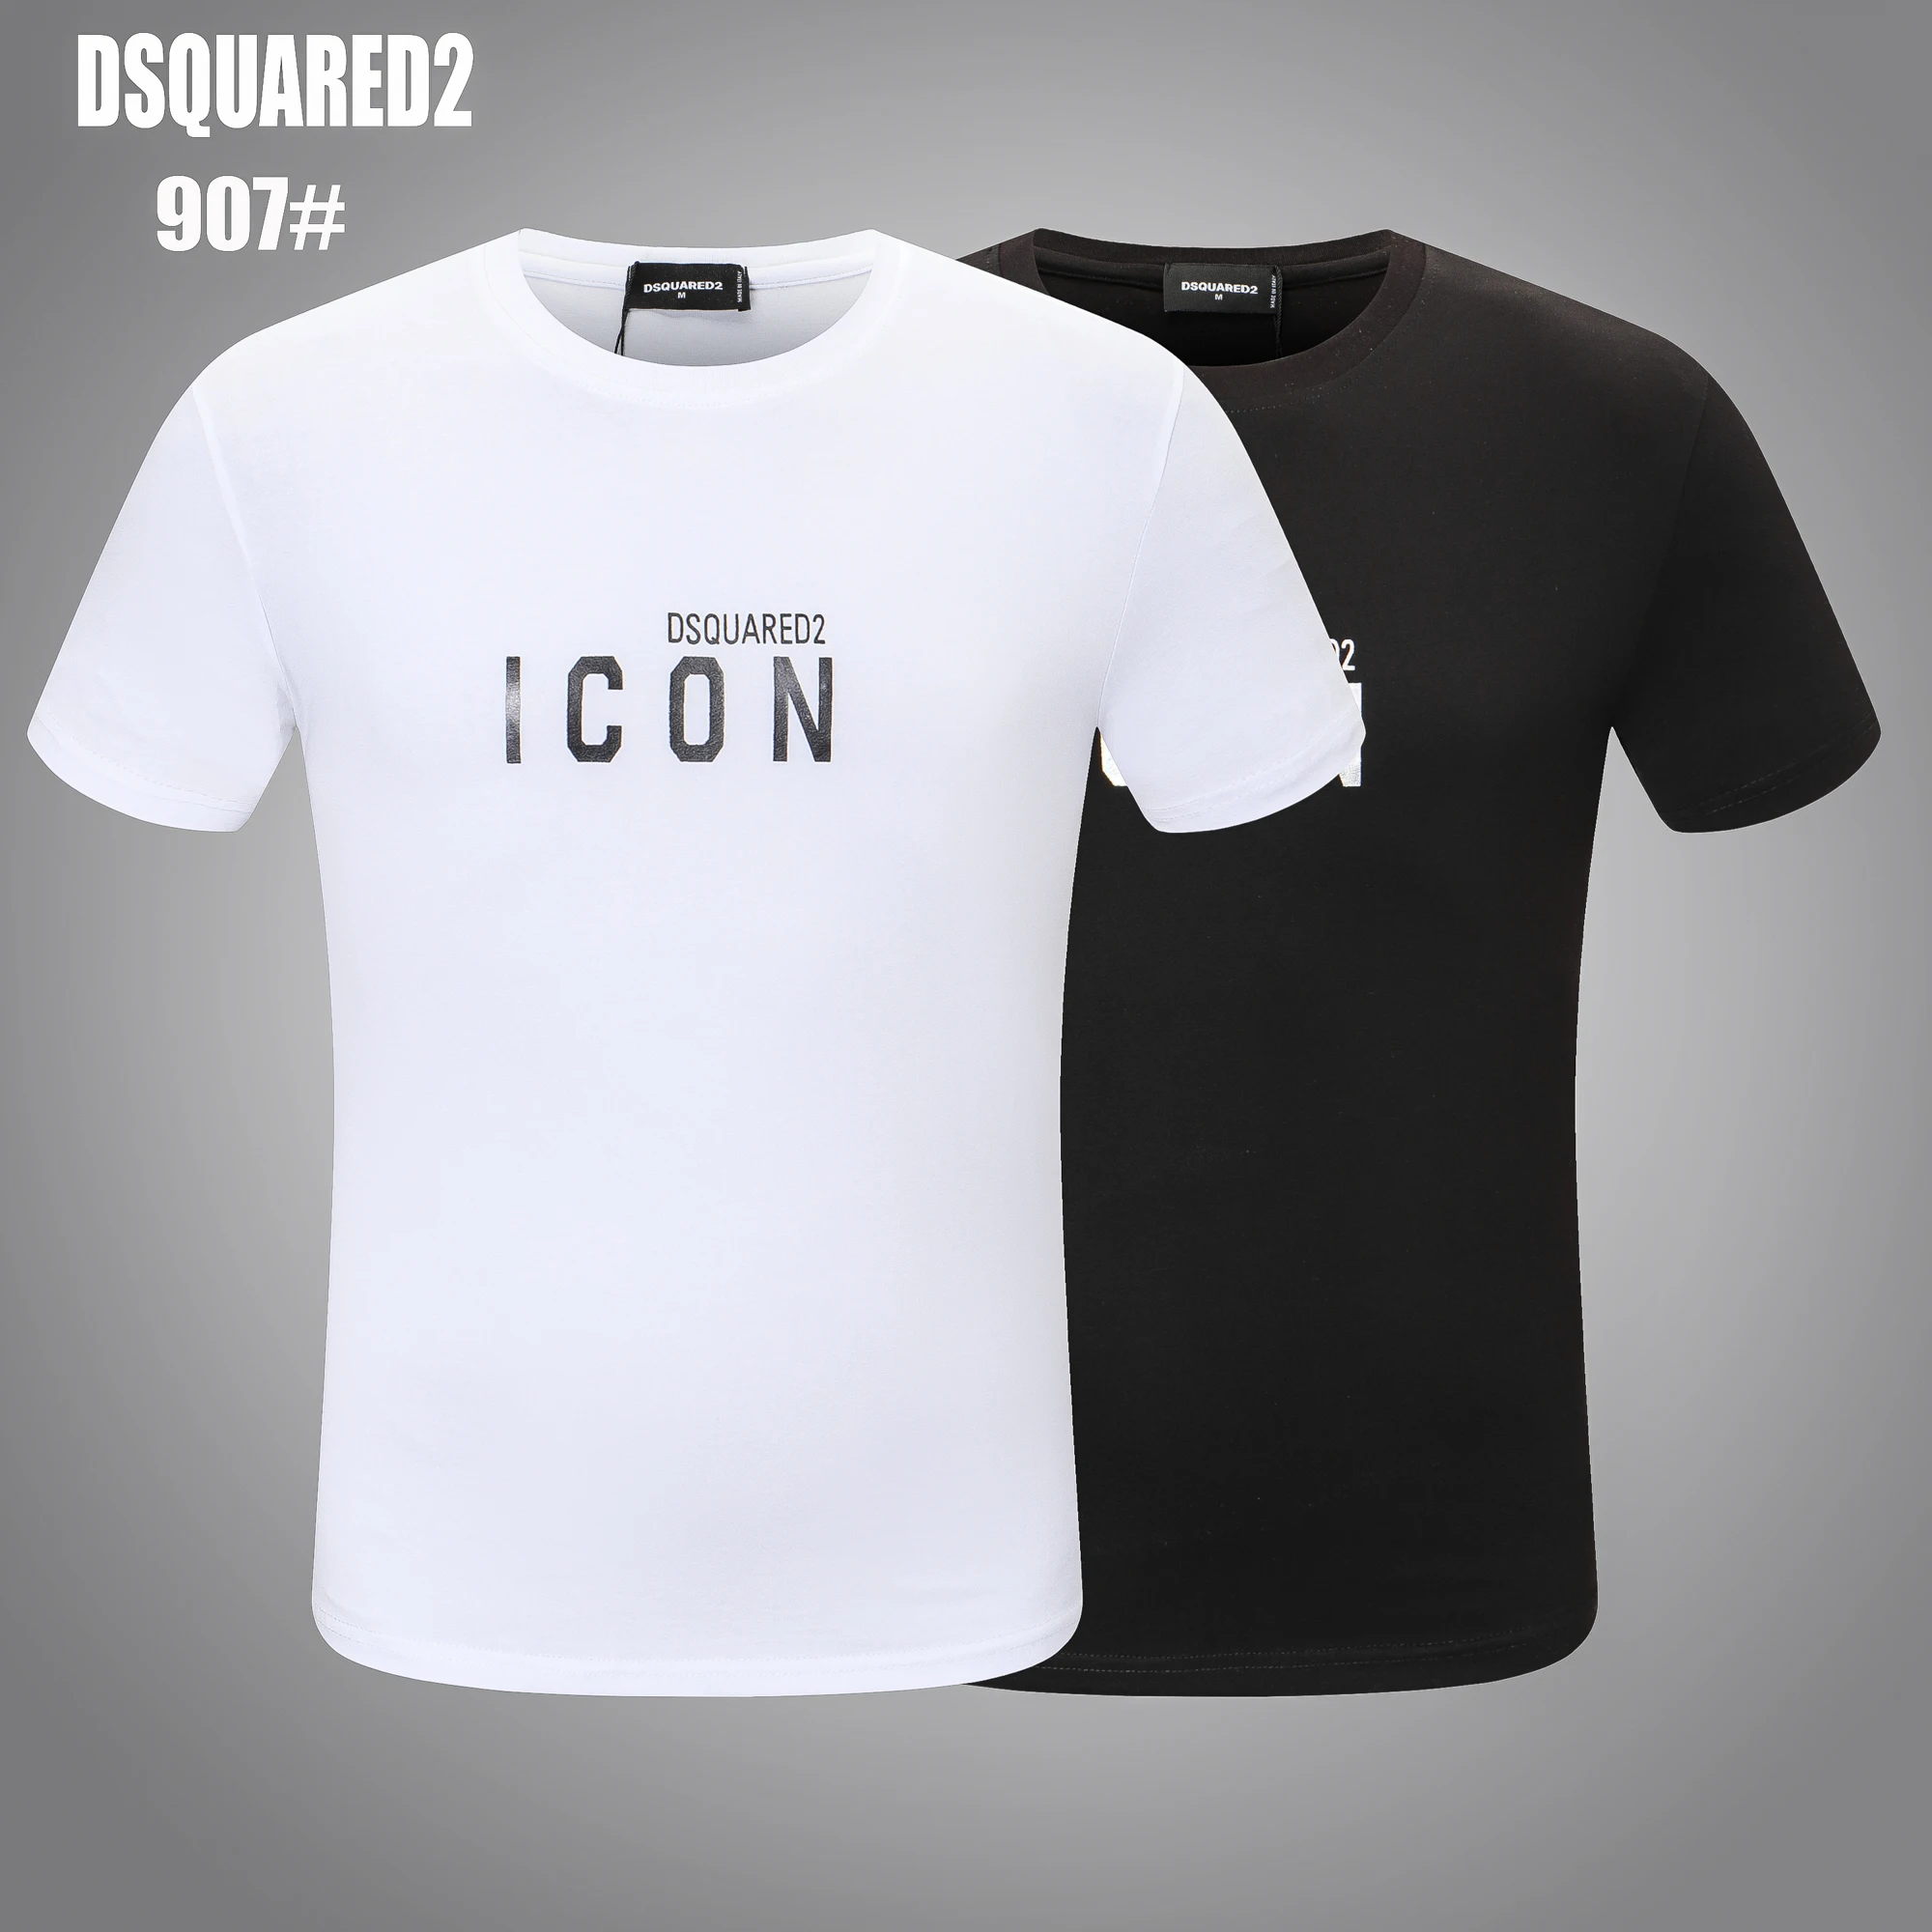 Dsquared2-oversized cotton T-shirt, designer embroidery, customized models, new arrivals 907